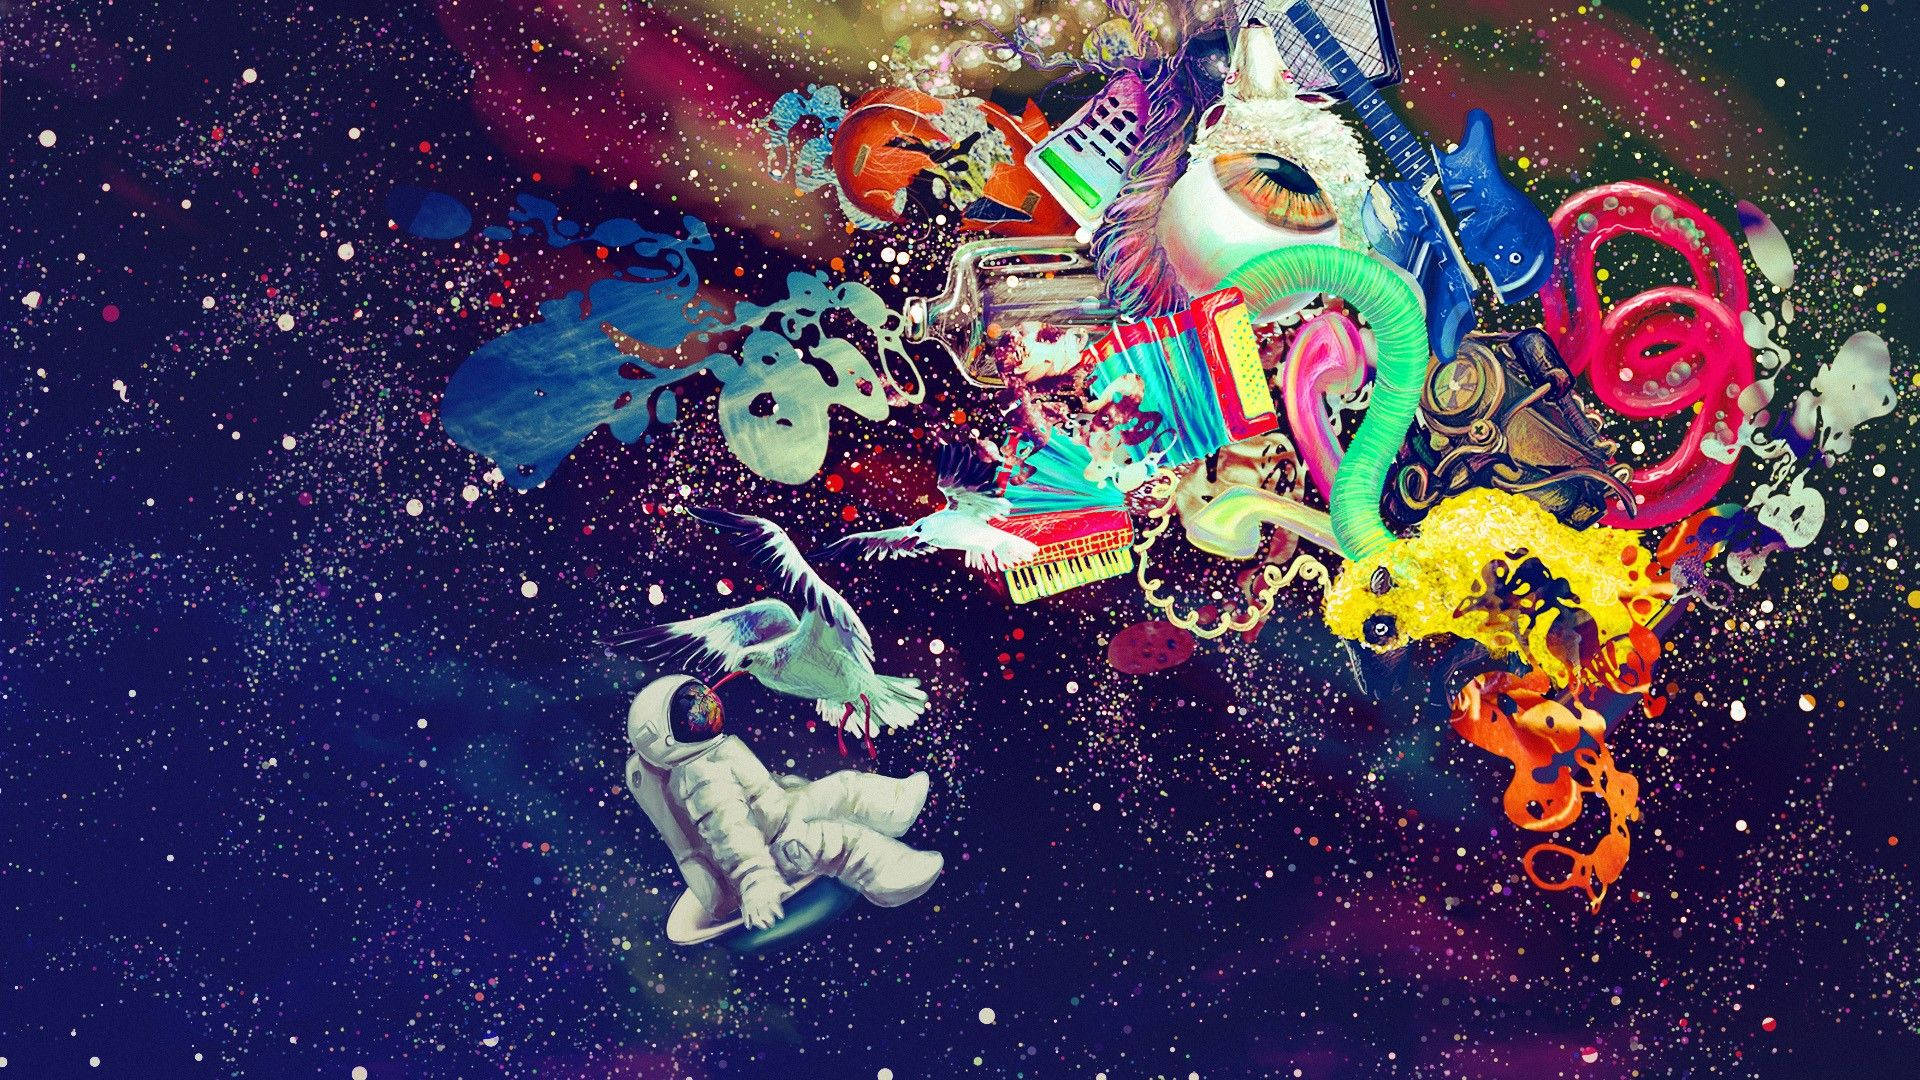 A psychedelic space art wallpaper with musical instrument add-ons. 